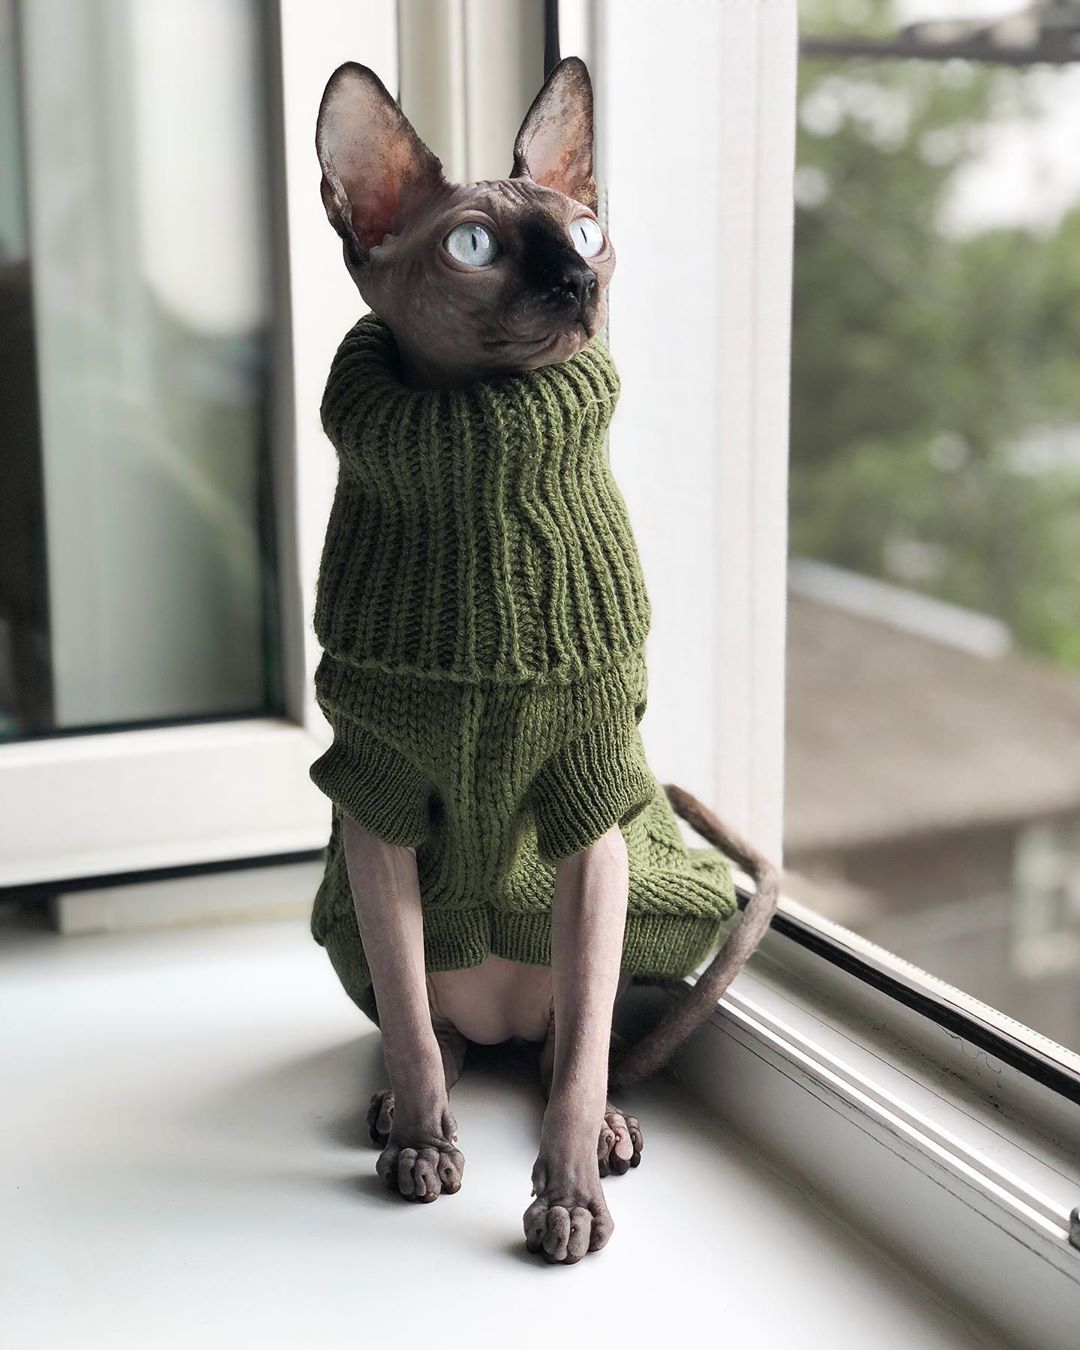 A Sphynx Cat wearing a green sweater sitting by the window